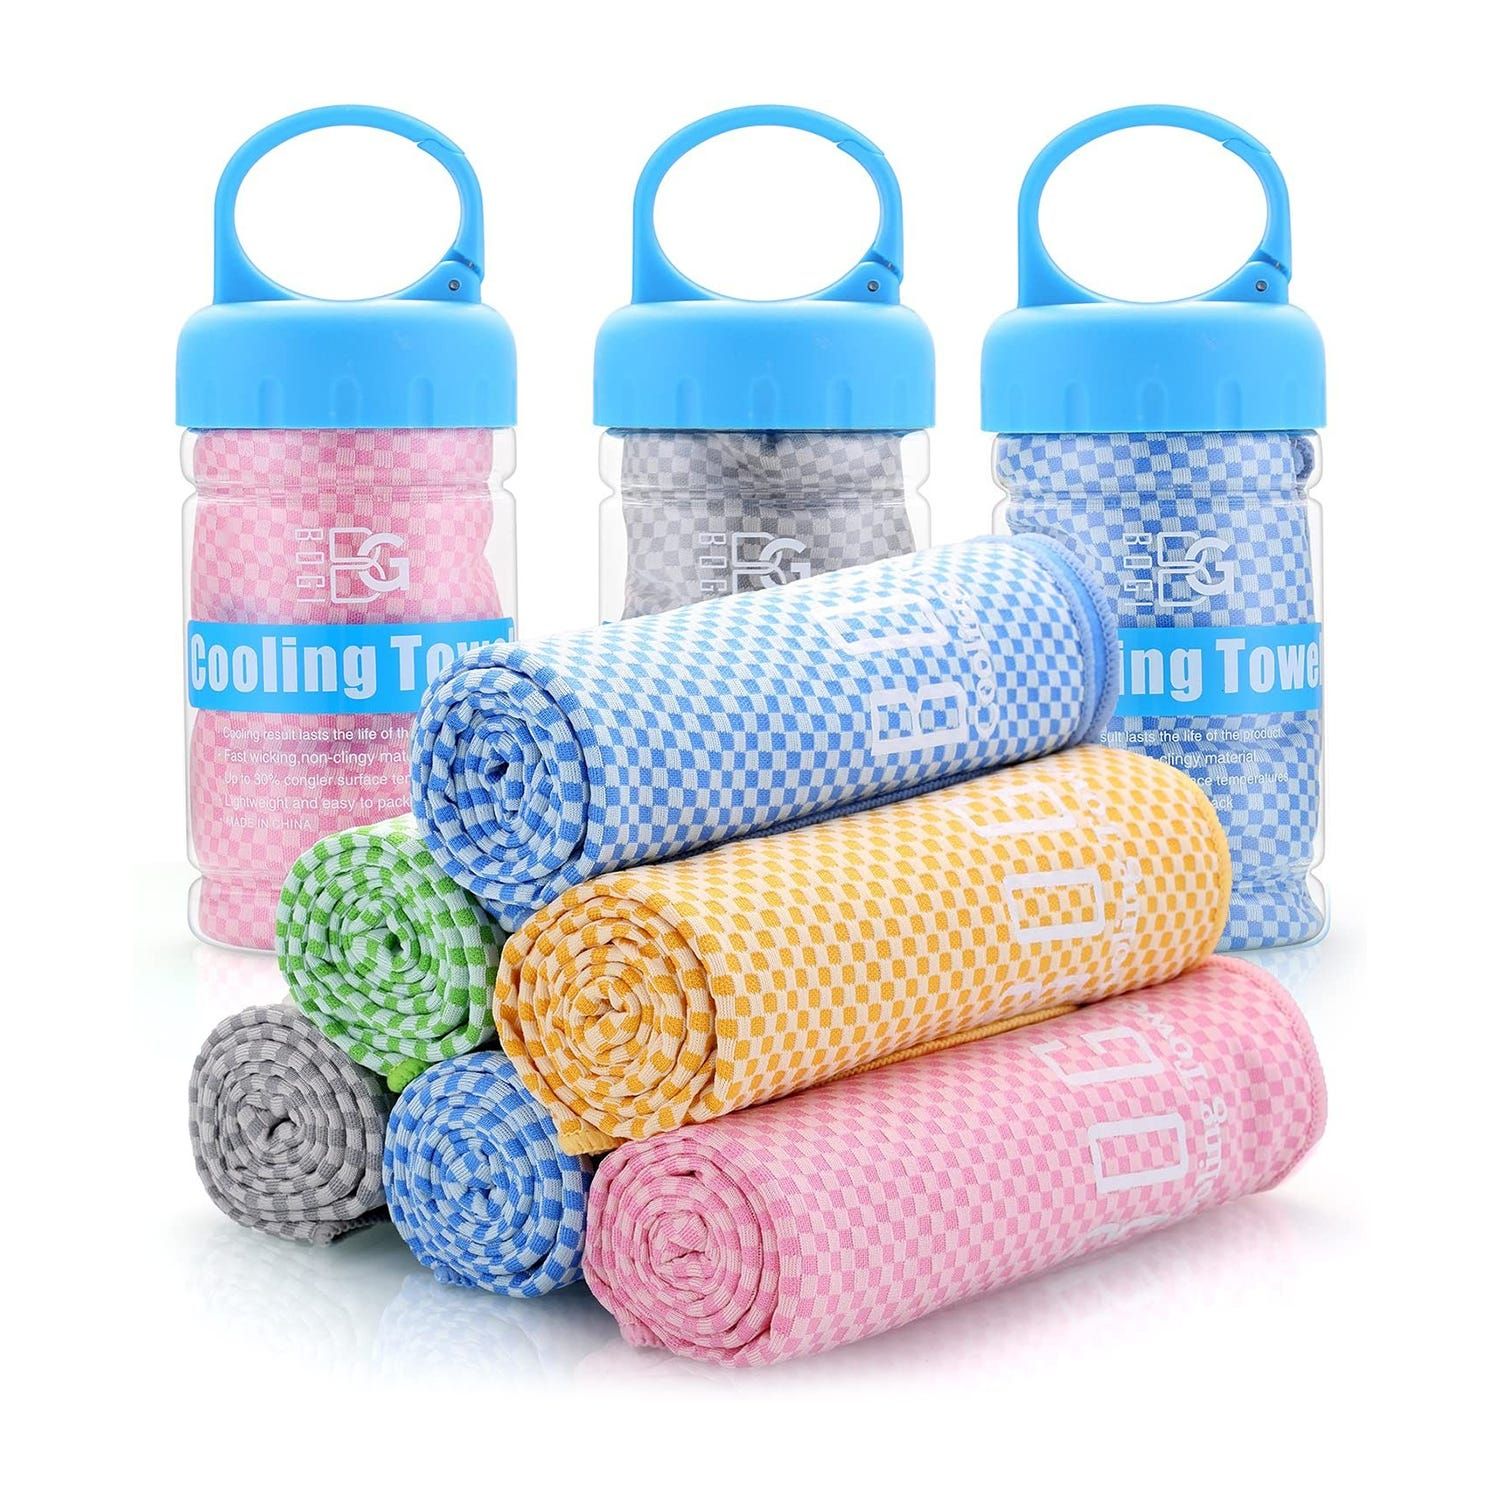 CALISTOUK Outdoor Instant Ice Cooling Towel 